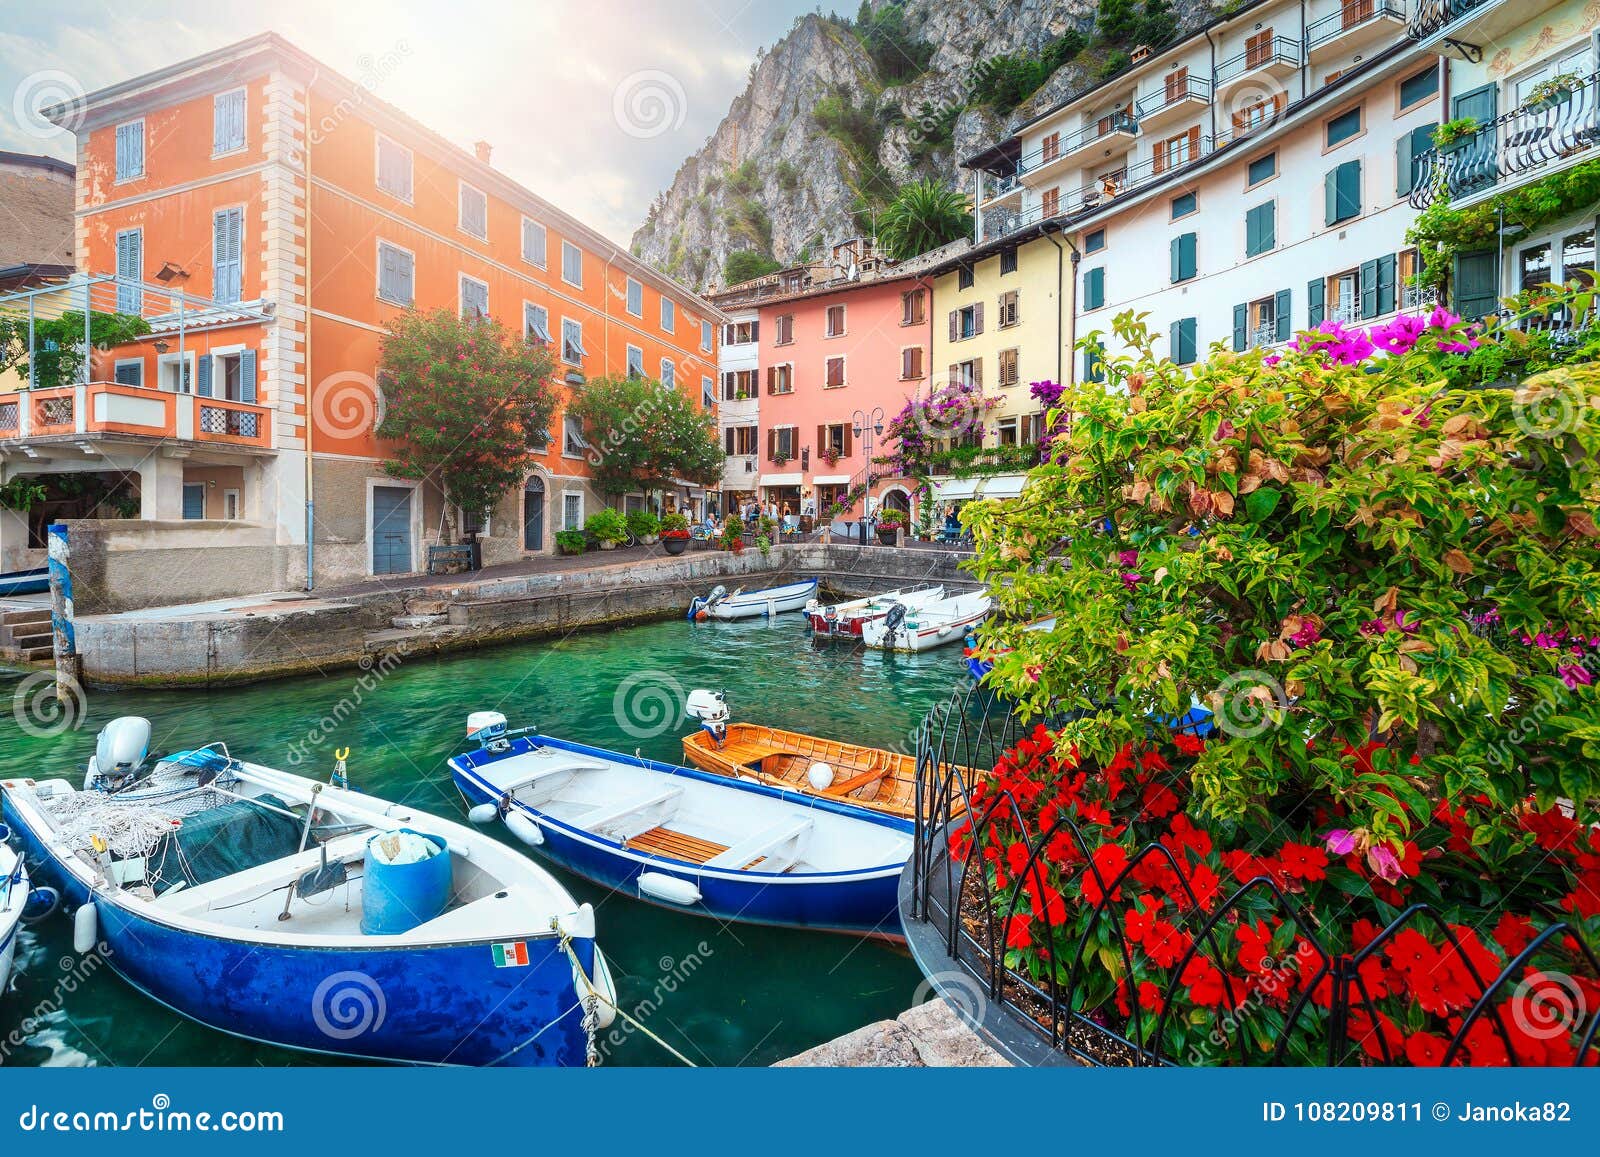 colorful boats in harbor of limone sul garda, lombardy, italy